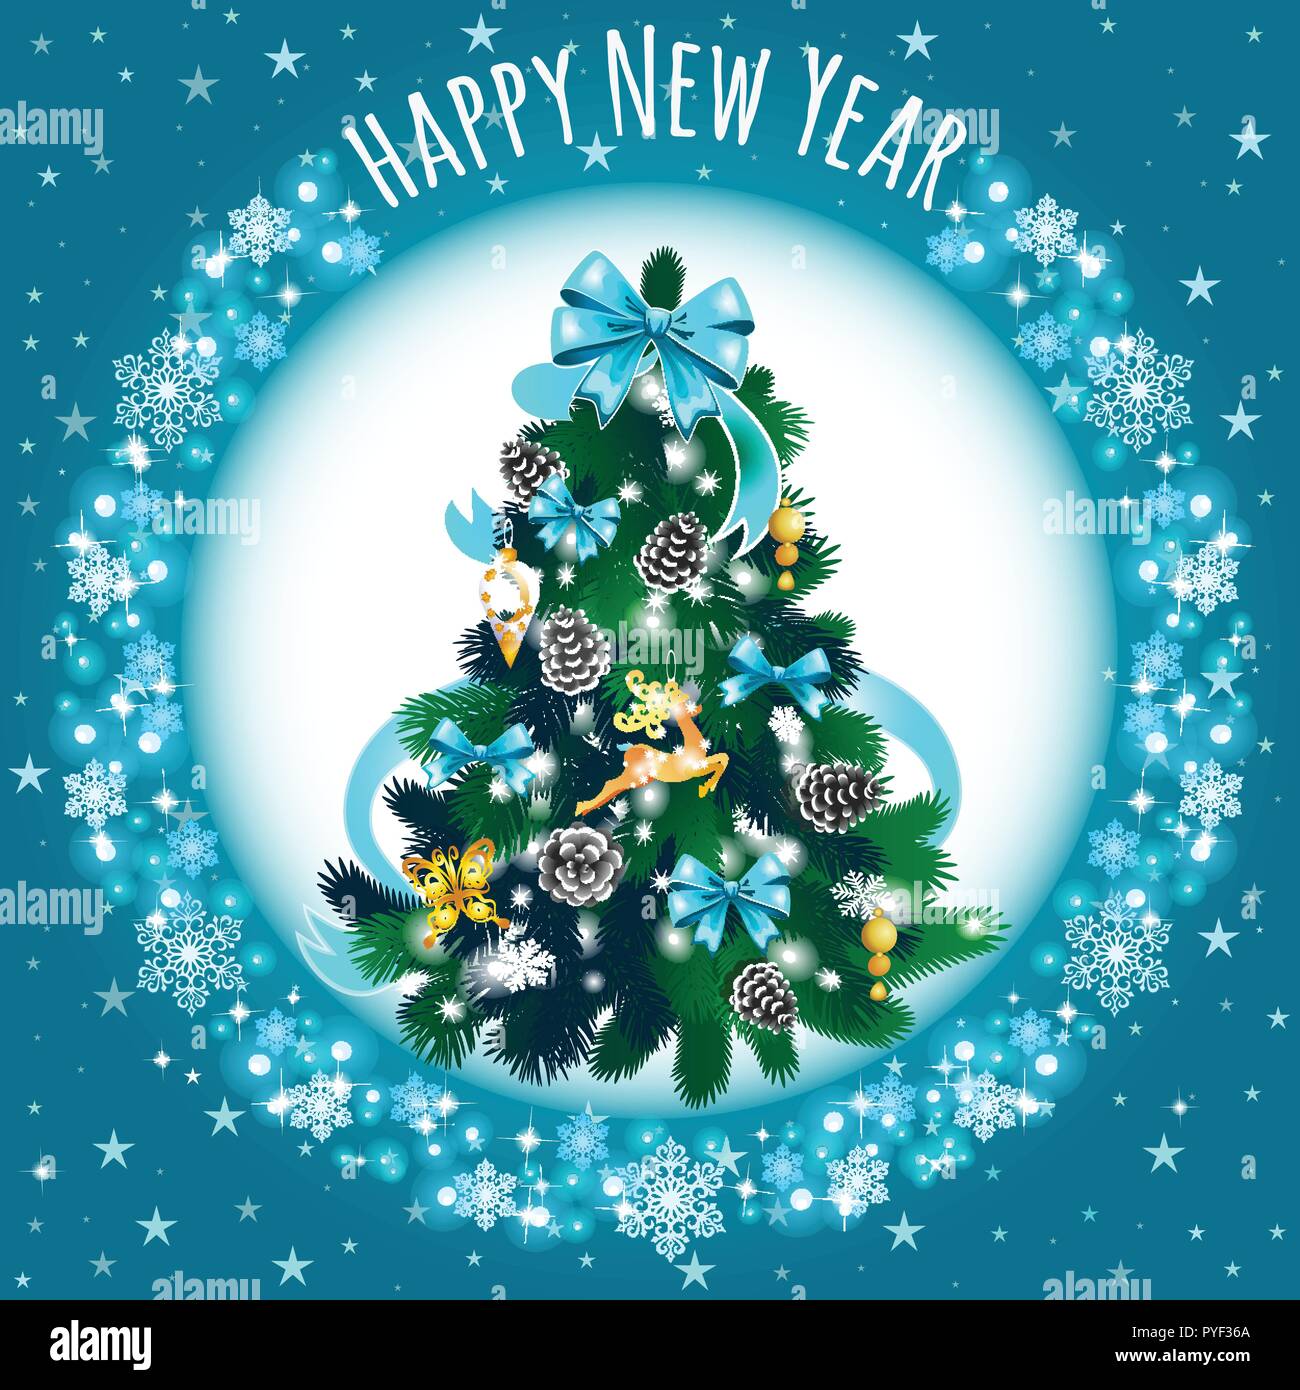 Sketch With Cute Christmas Tree With Blue Ribbon Bow. New Year Gifts, Texture Of Snowflakes, Classic Christmas Decorations And Baubles. Sample Of Poster, Invitation And Other Card. Vector Illustration Stock Vector